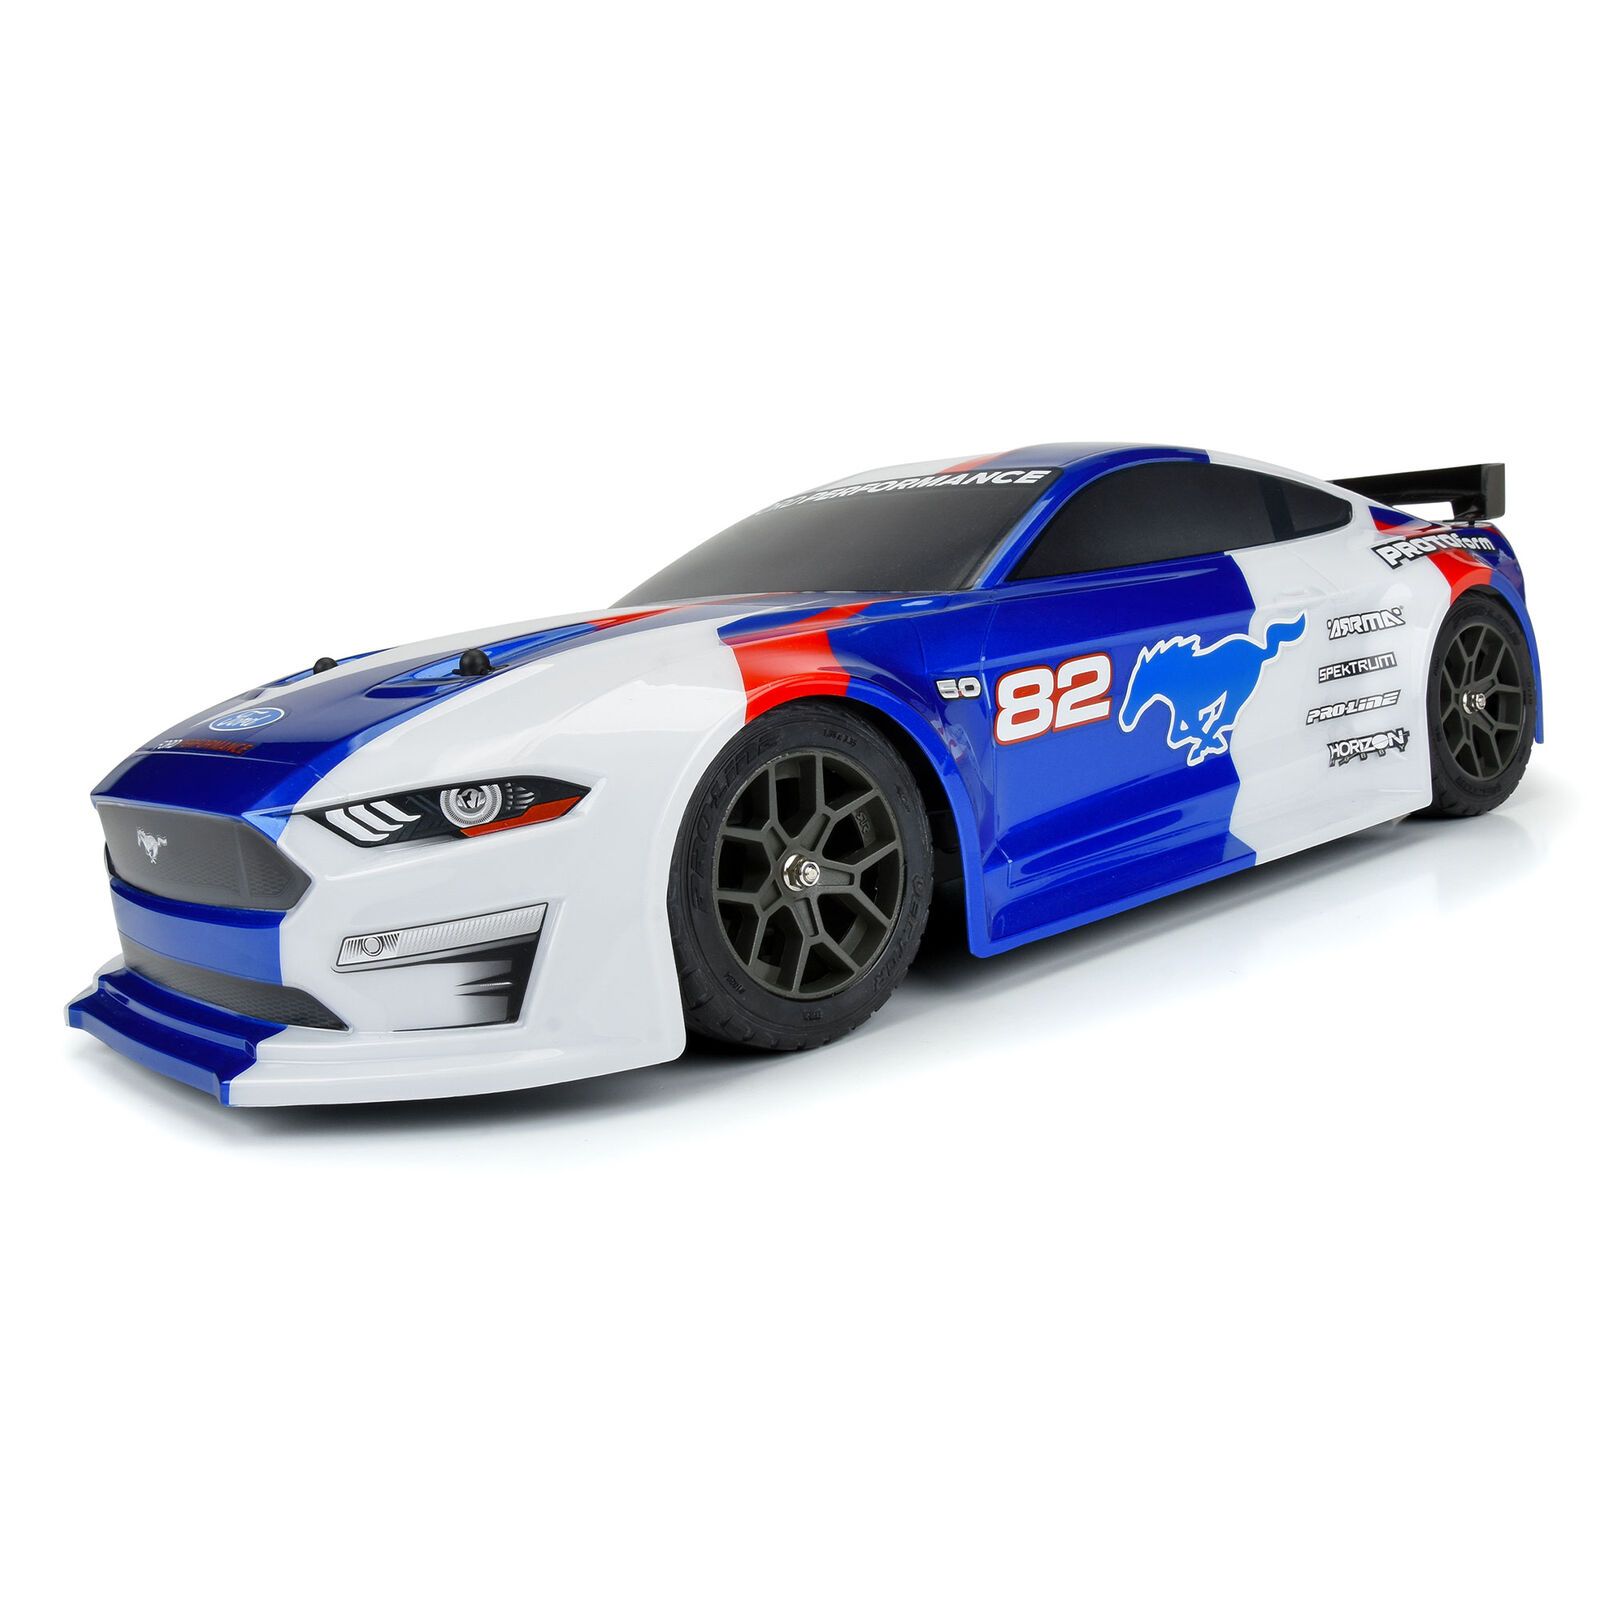 PROTOform - Pro-line Vendetta 3S 2021 Pro-Line Racing & Ford Infraction Mustang | Painted (Blue): 1/8 Body